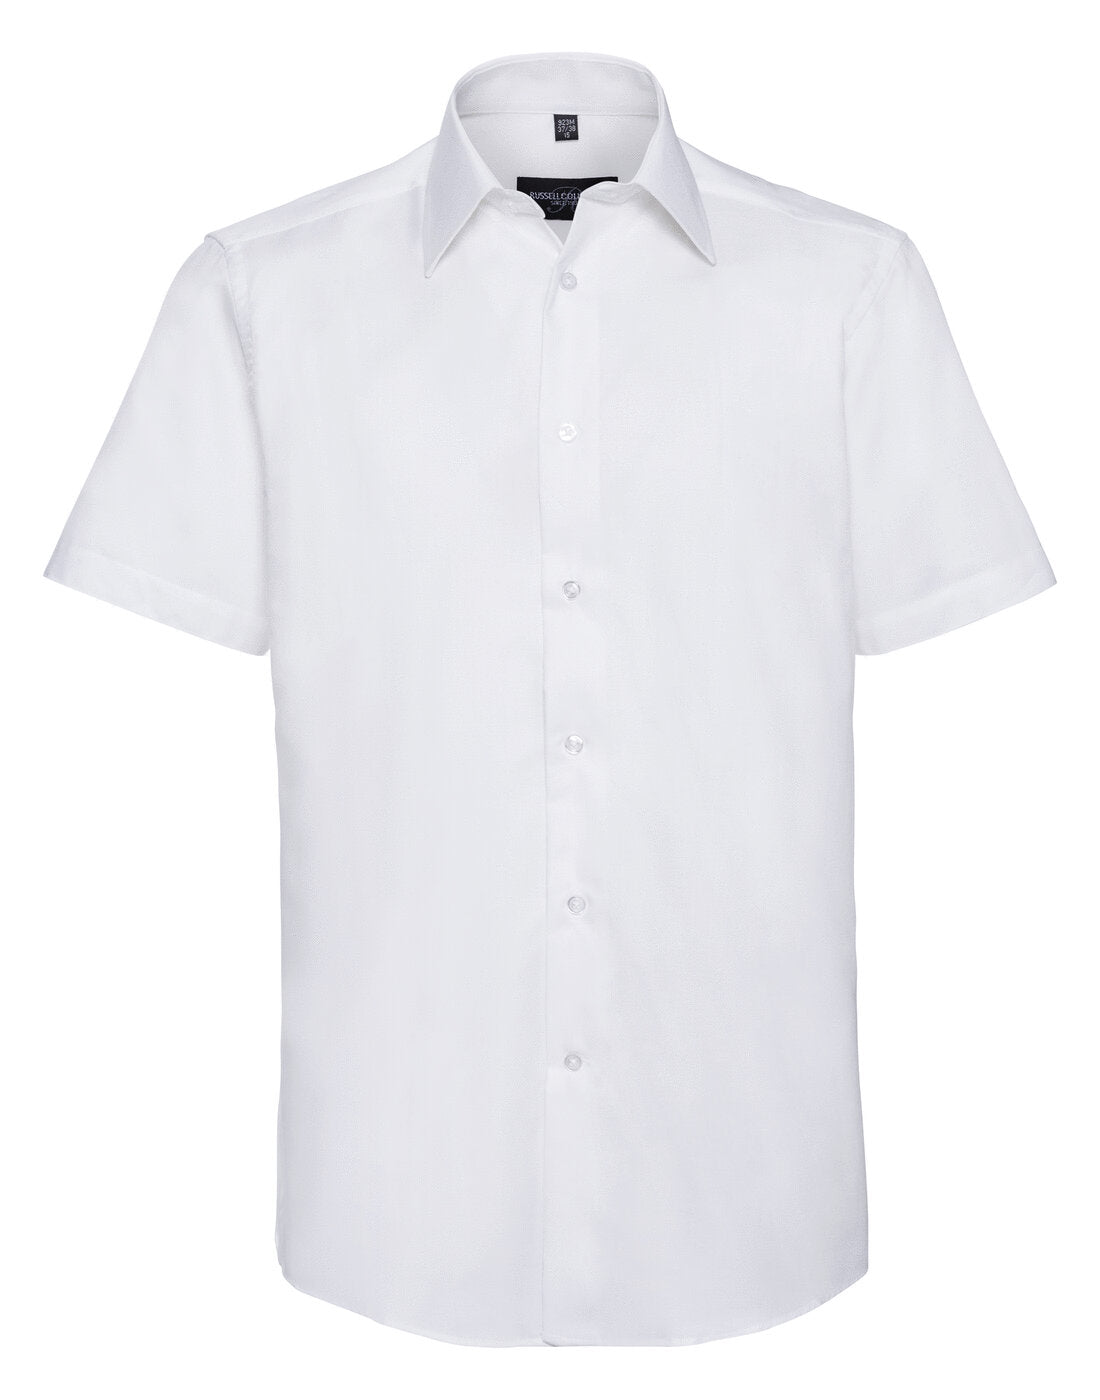 Russell Short Sleeve Tailored Oxford Shirt White